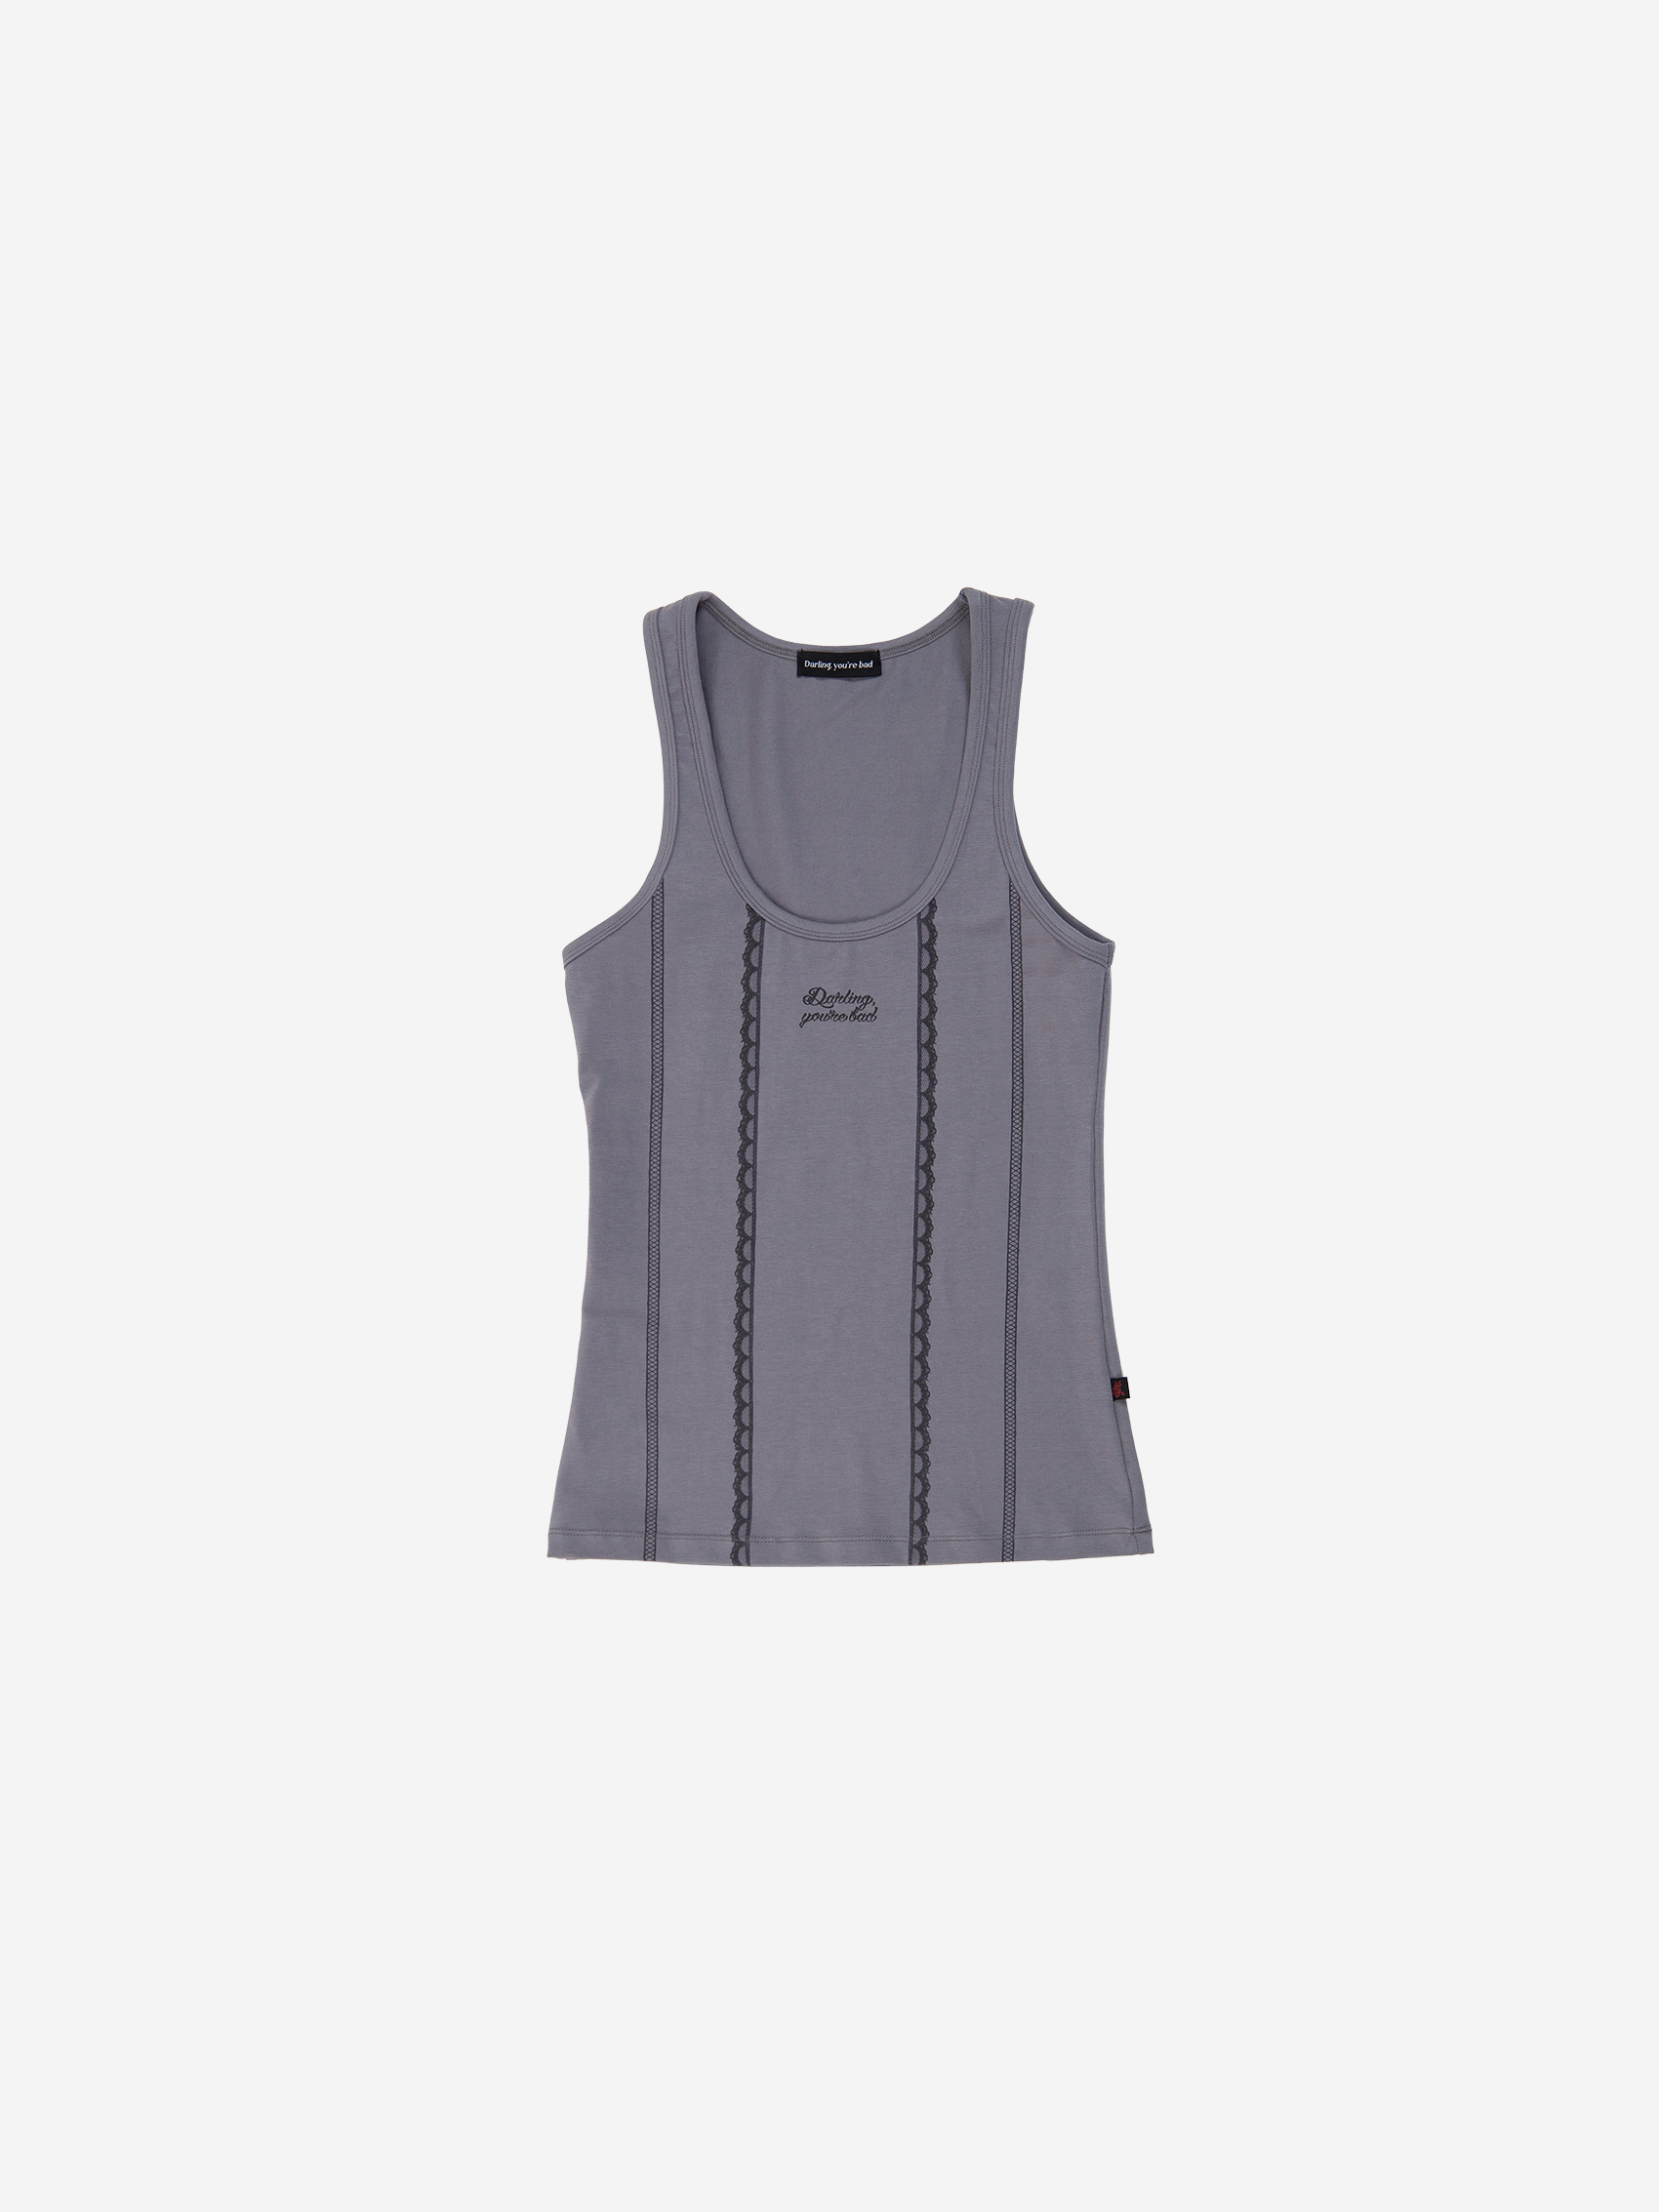 LACE PRINTED SLEEVELESS # CHARCOAL BLUE